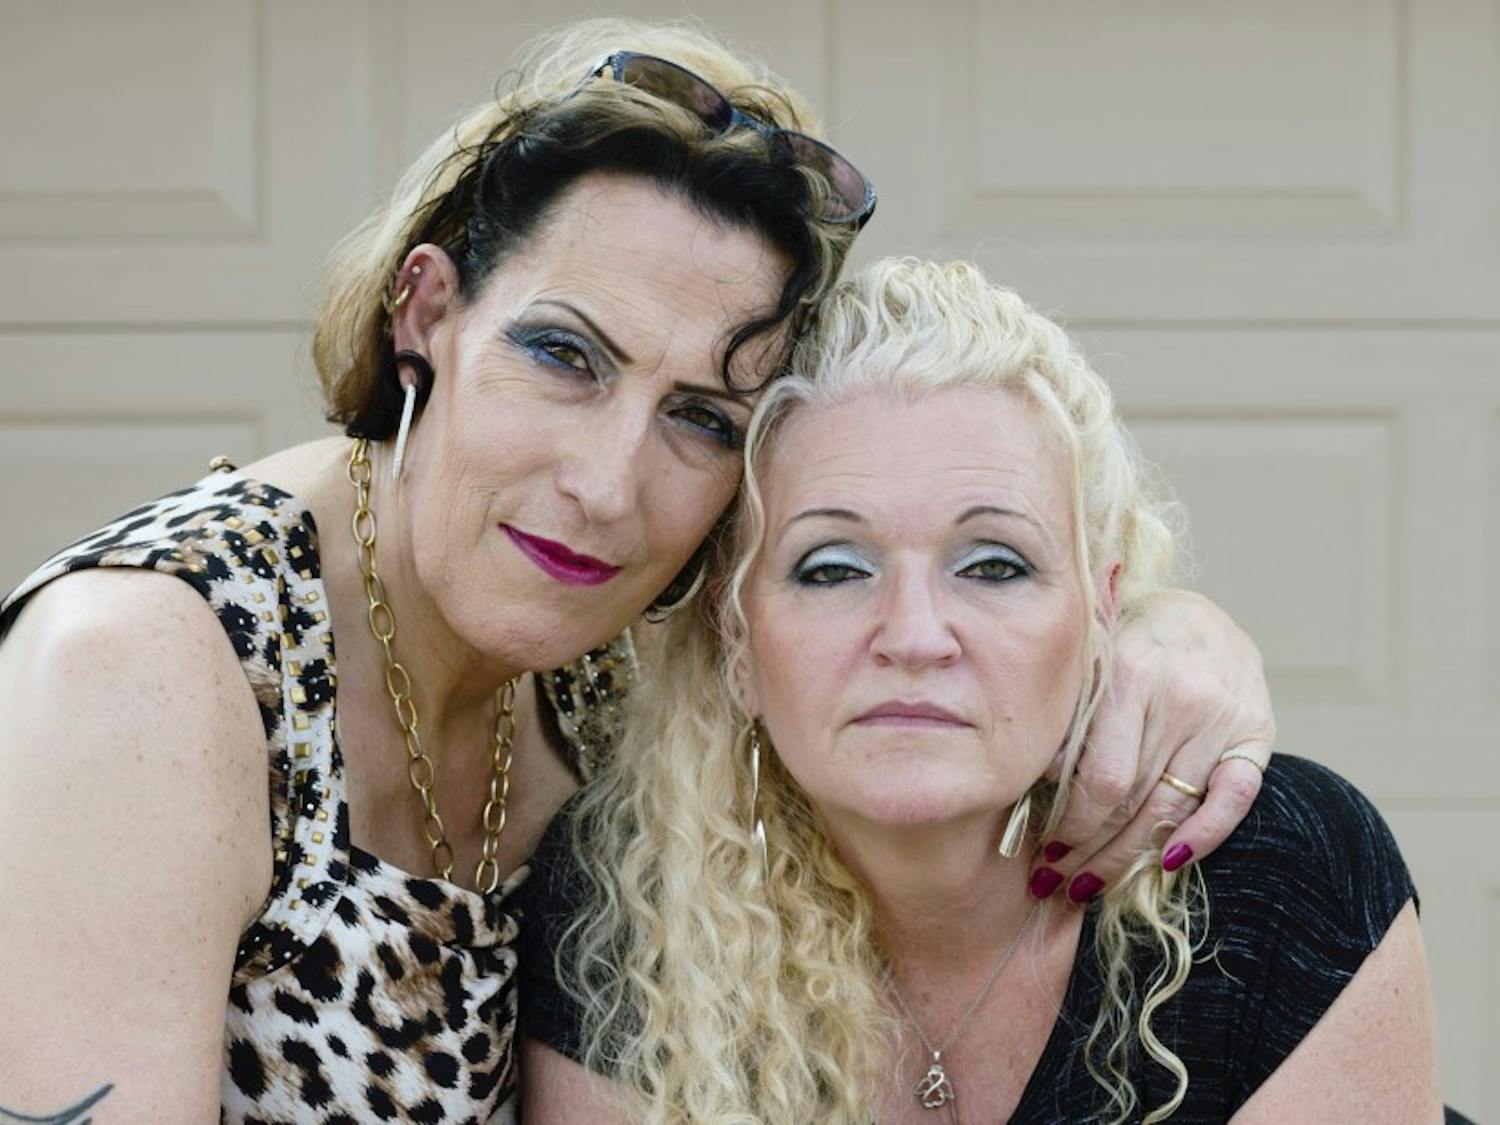 SueZie and Cheryl of Valrico, Florida, are two of the trans or gender non-conforming individuals featured in the Rubenstein Library's current exhibit "To Survive on This Shore."